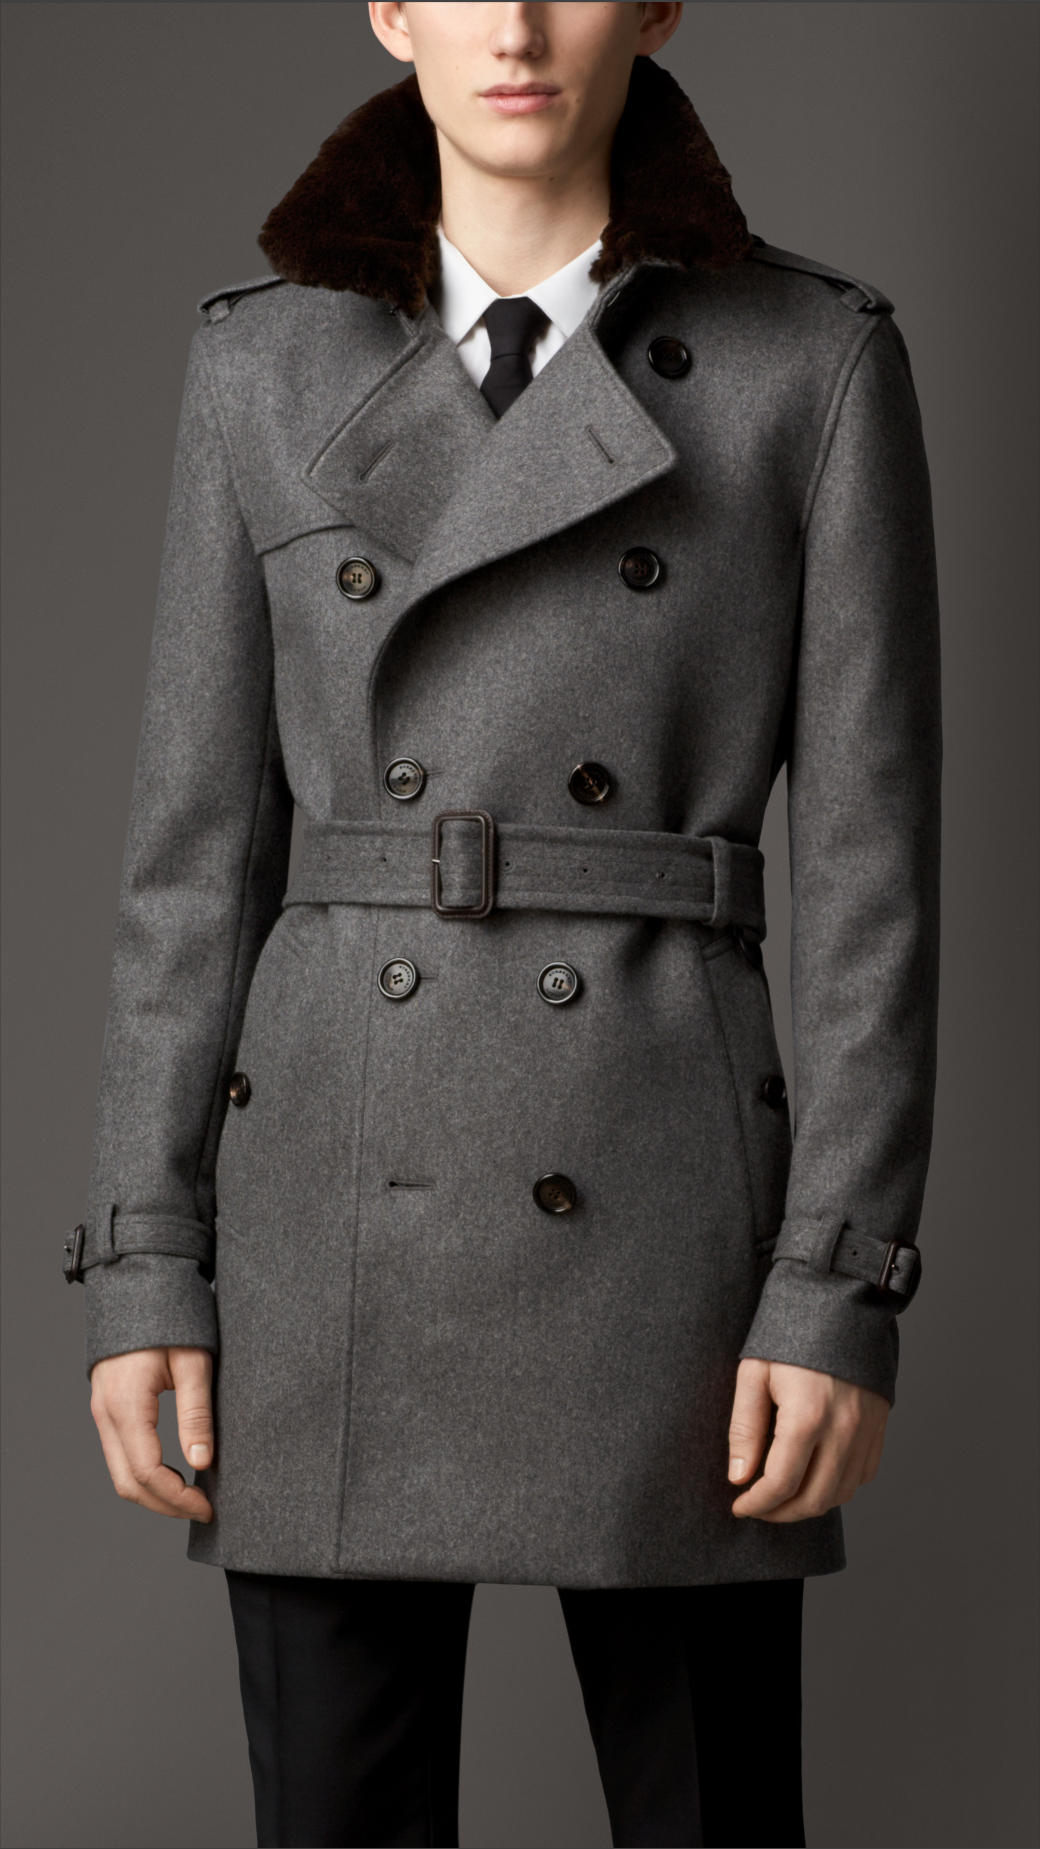 Lyst - Burberry Fur-Collar Cashmere Trench Coat in Gray for Men